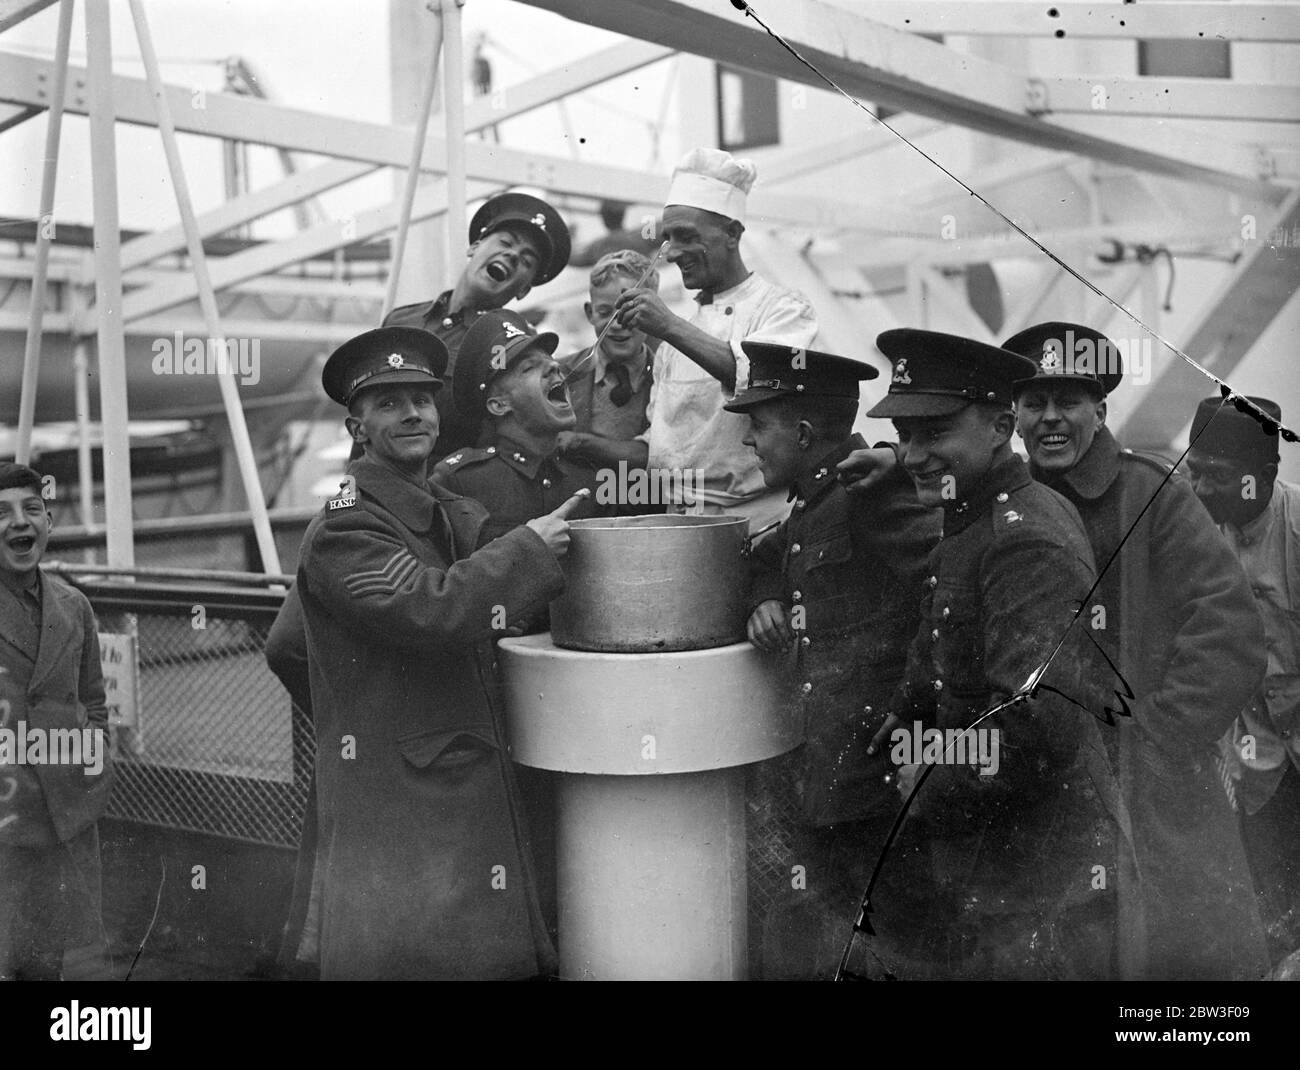 Lancashire fusiliers to spend Christmas afloat - puddings as consolation . Tasting the Christmas pudding on board the Dorsetshire at Southampton . 12 December 1935 Stock Photo